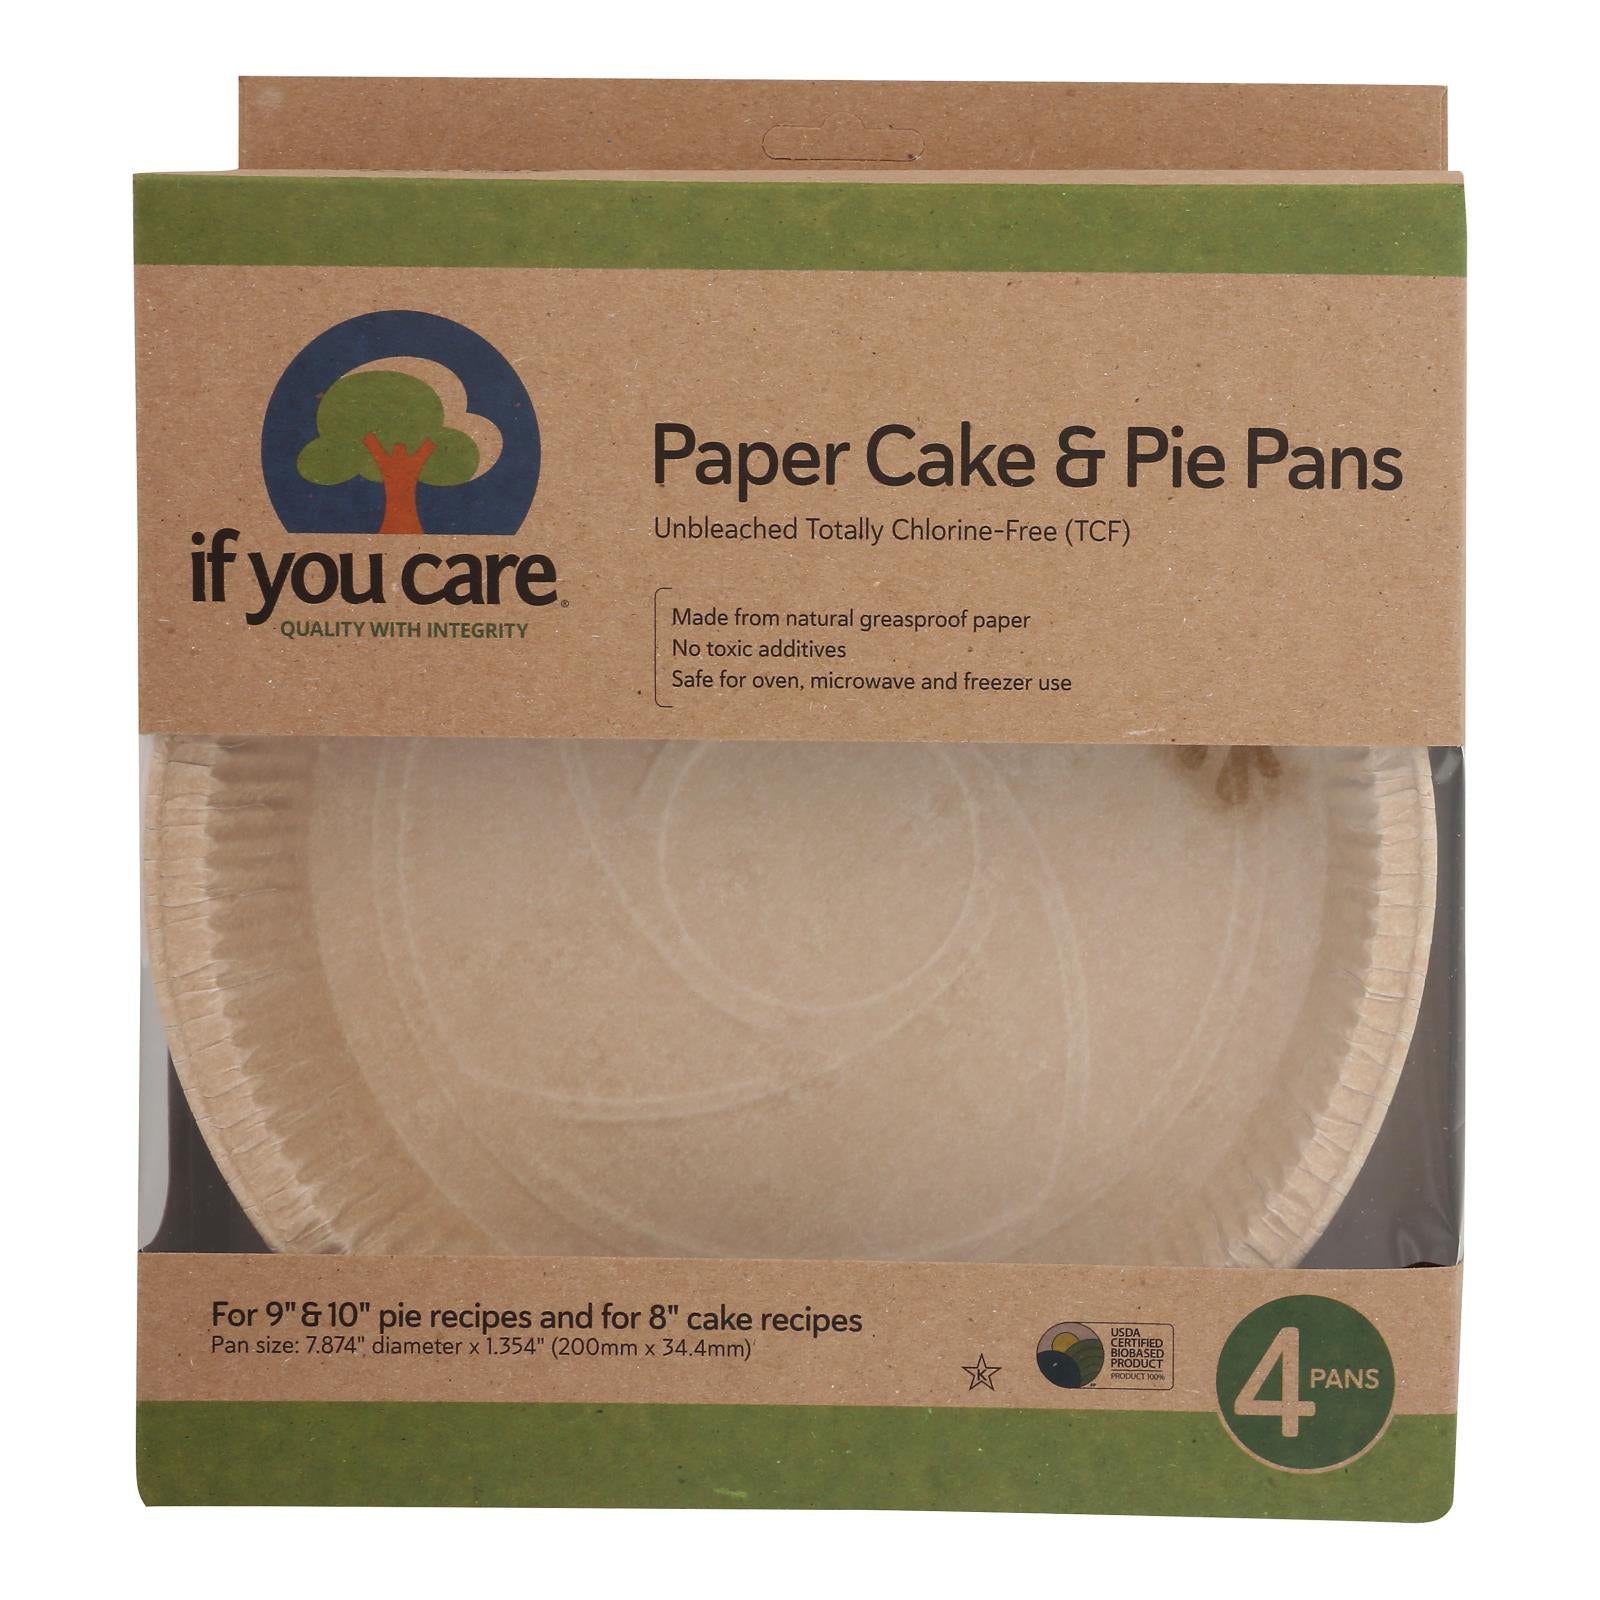 If You Care Pie Baking Pans - Paper Cake - Case Of 6 - 4 Count